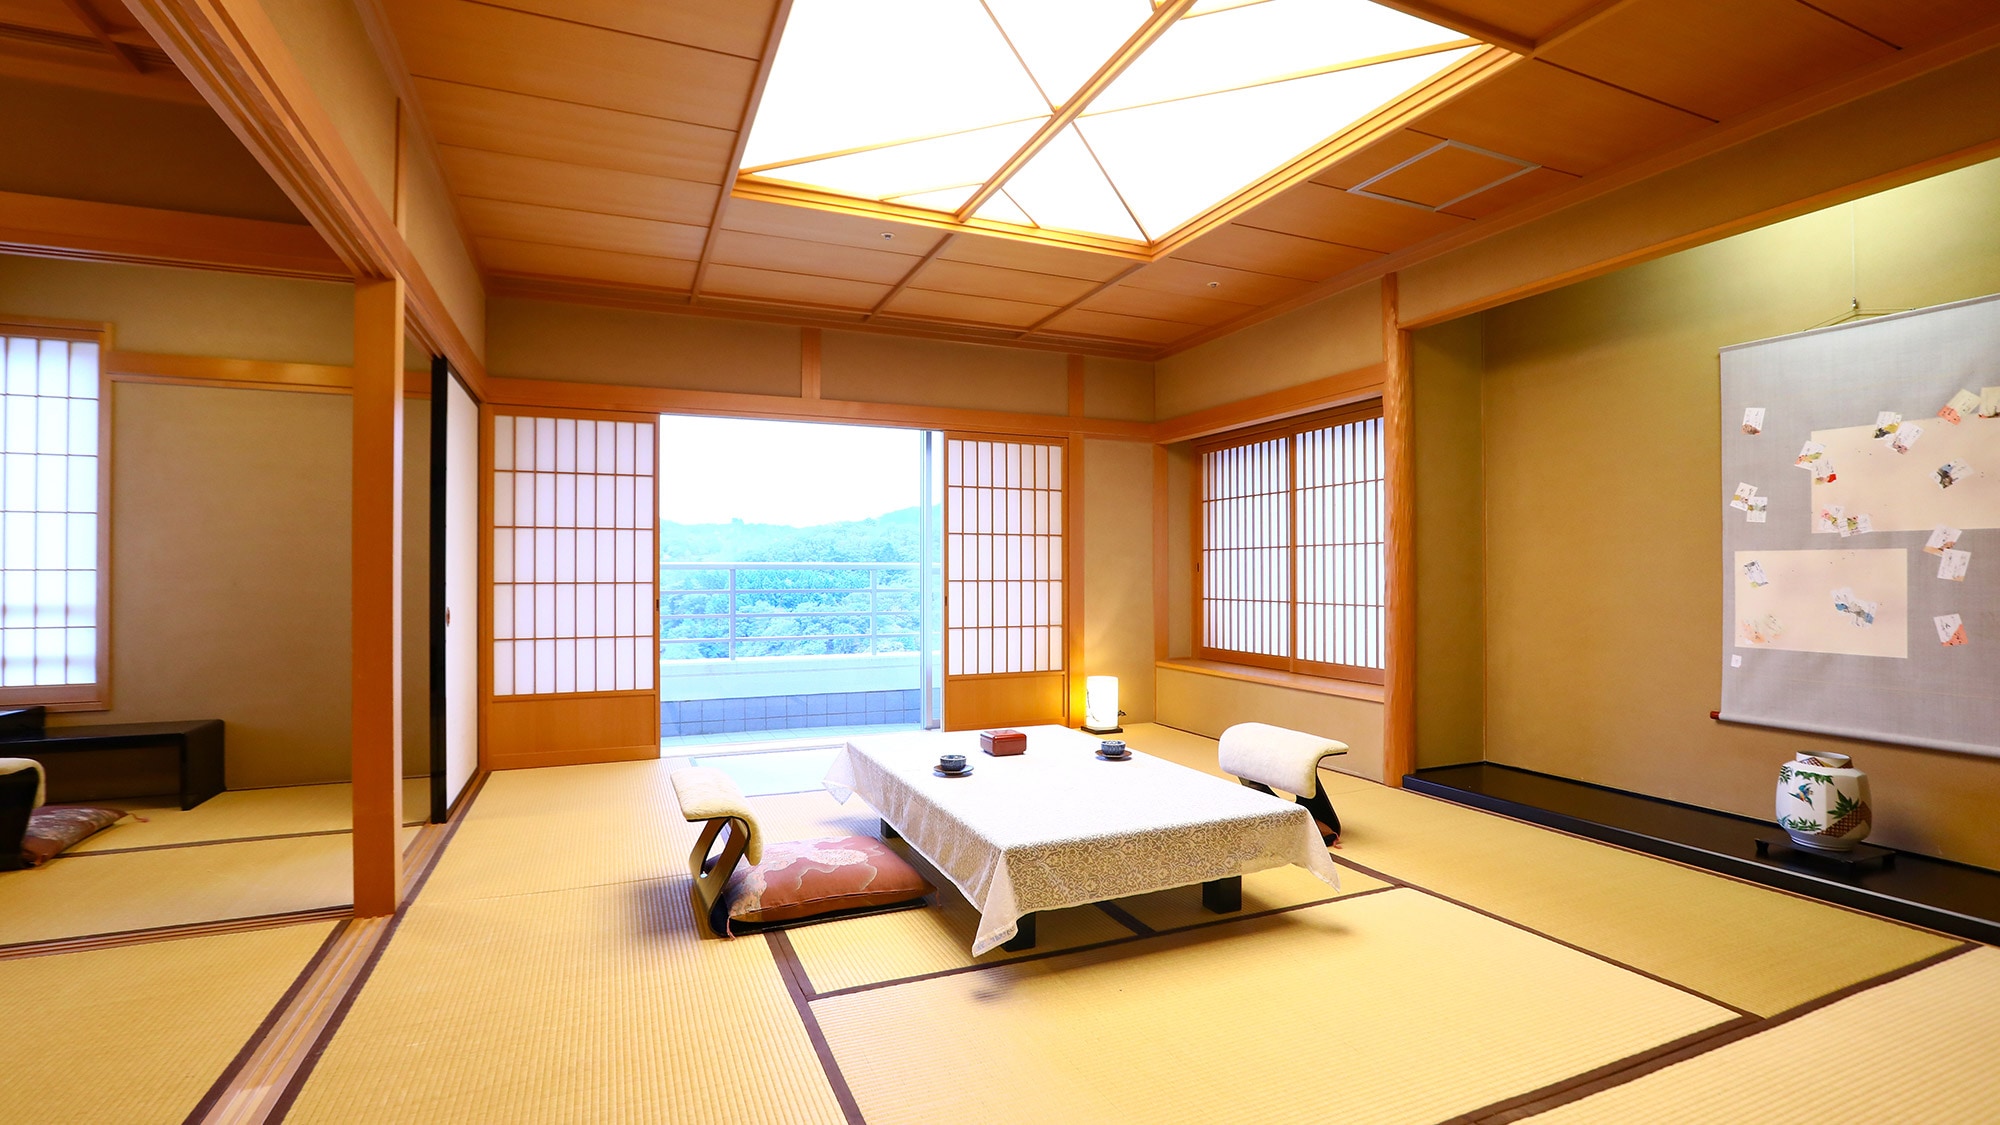 [Non-smoking] Japanese-style room 10 tatami mats + 4.5 tatami mats + living room & hellip; Only one guest room on the 11th floor of the top floor.